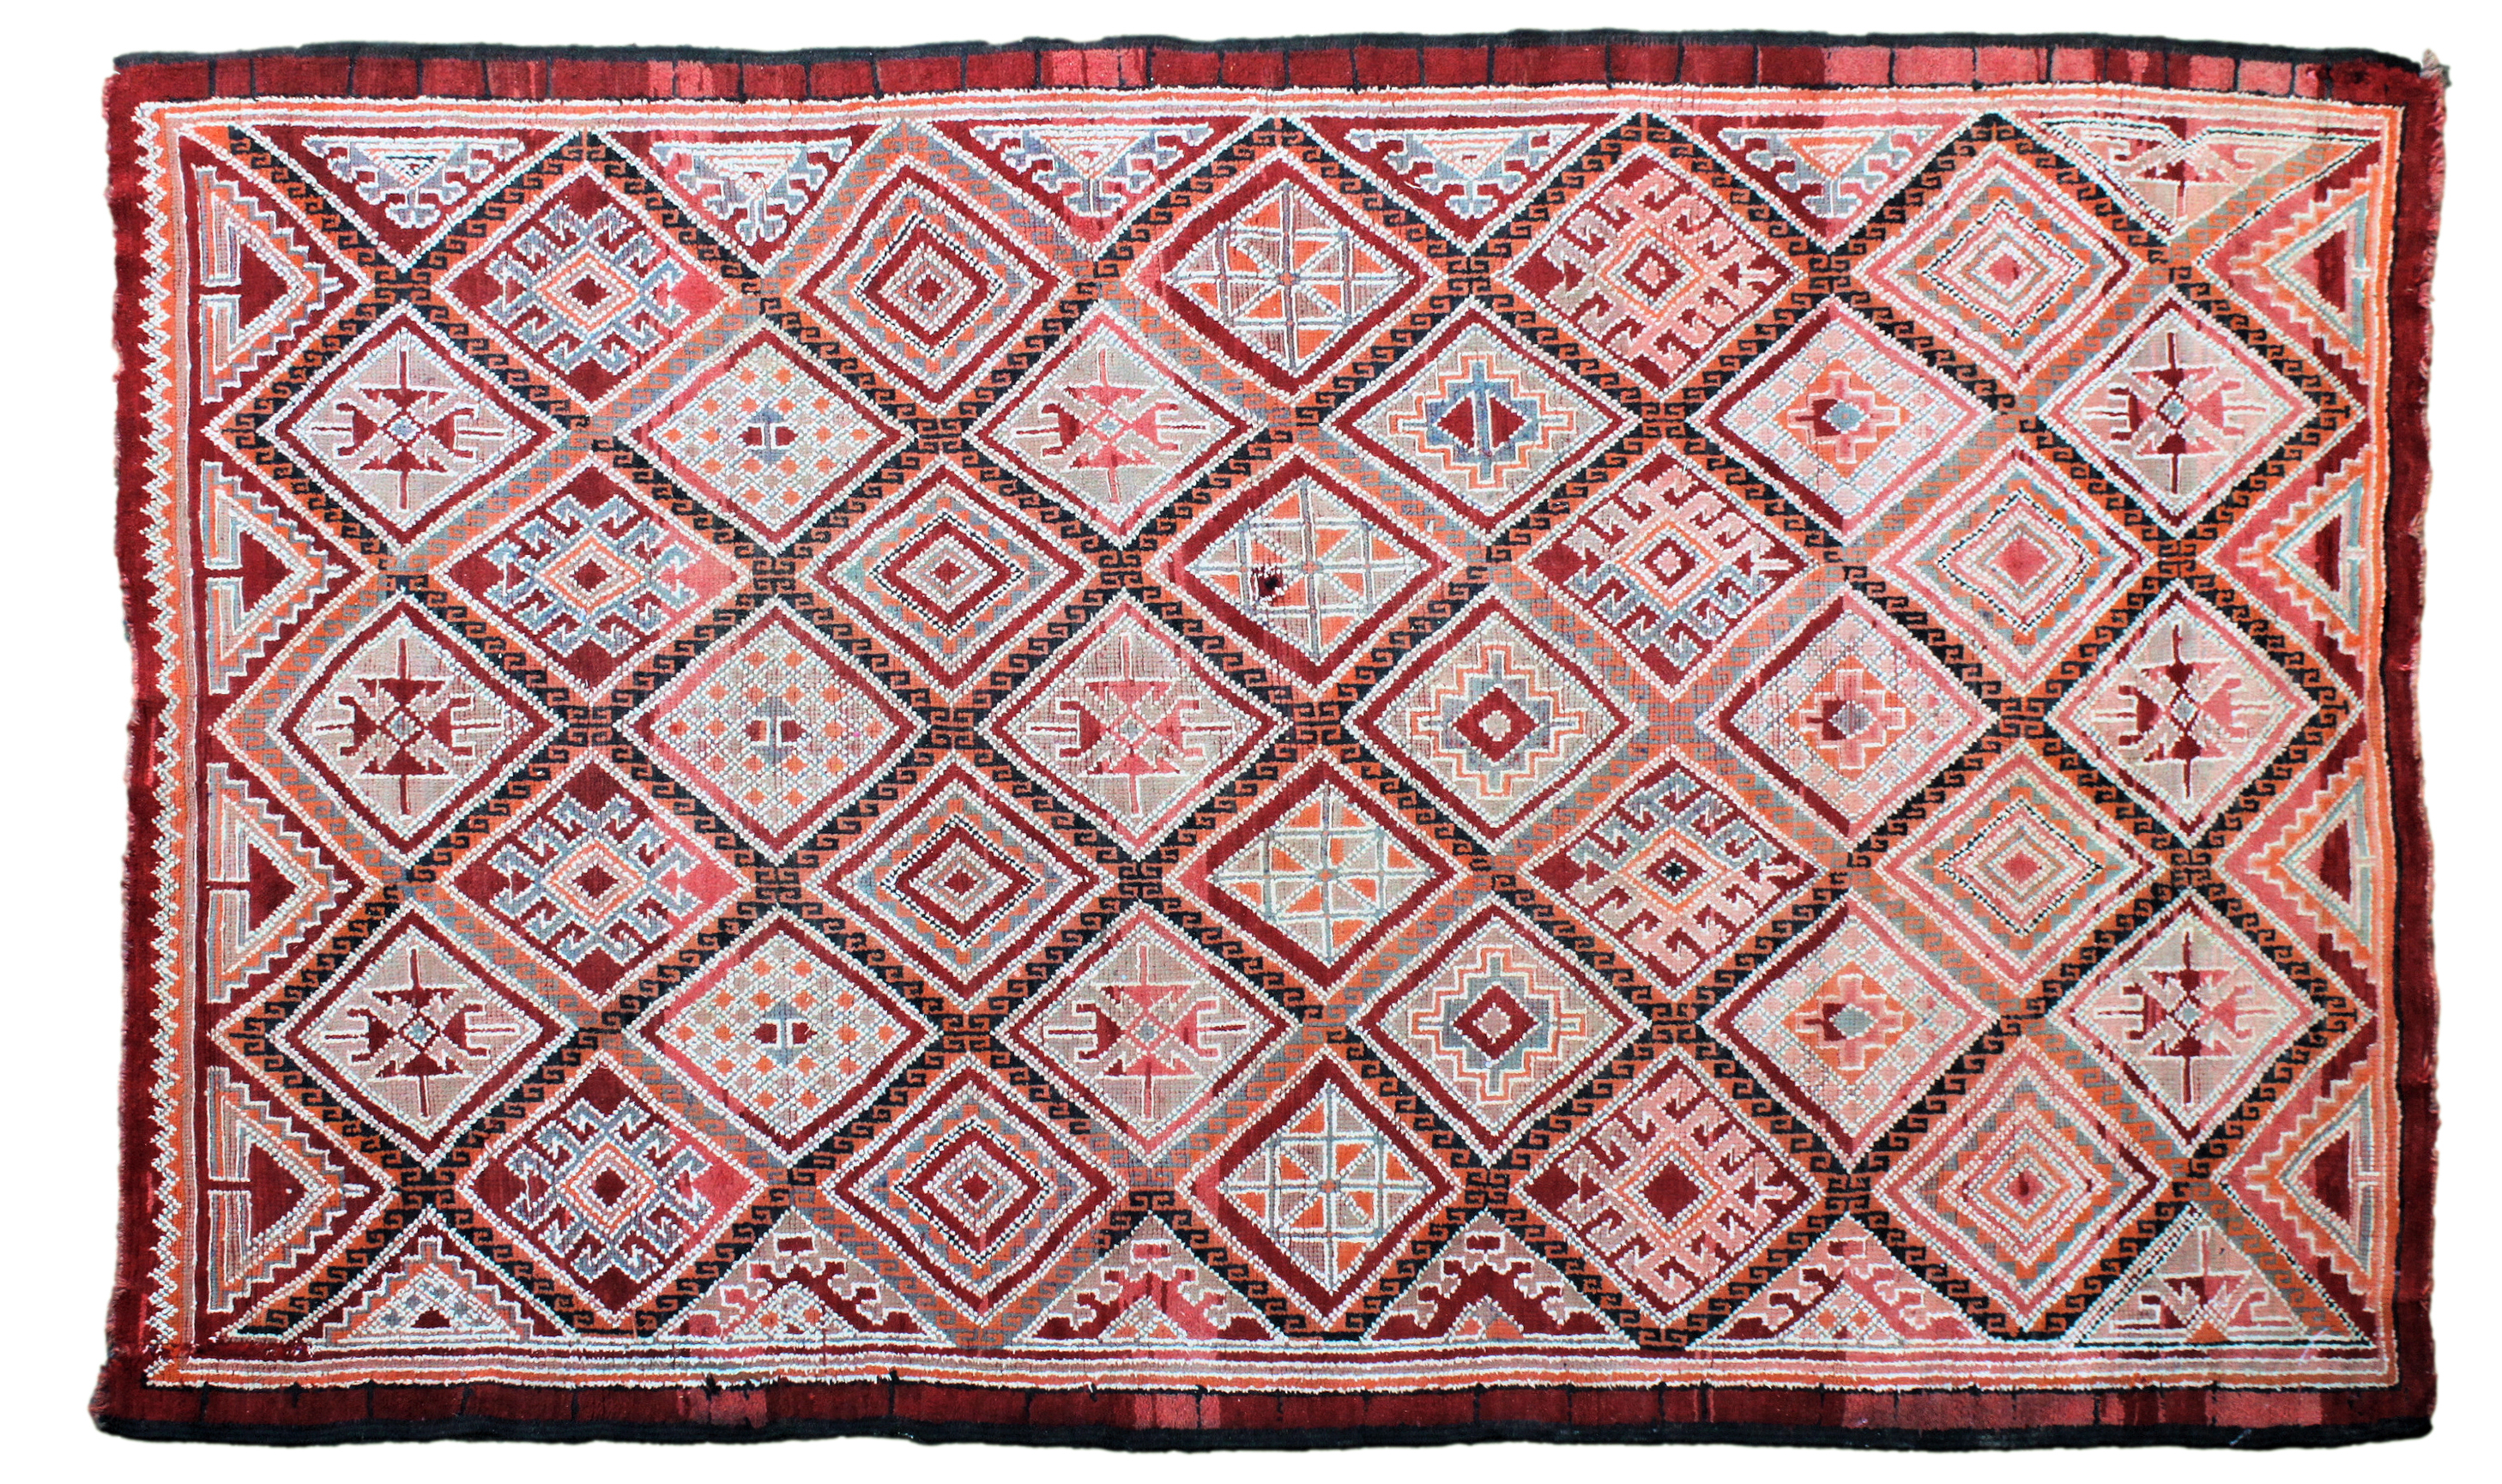 A large Kilim rug, 20th century, with all over diamond medallion decoration in muted reds, orange